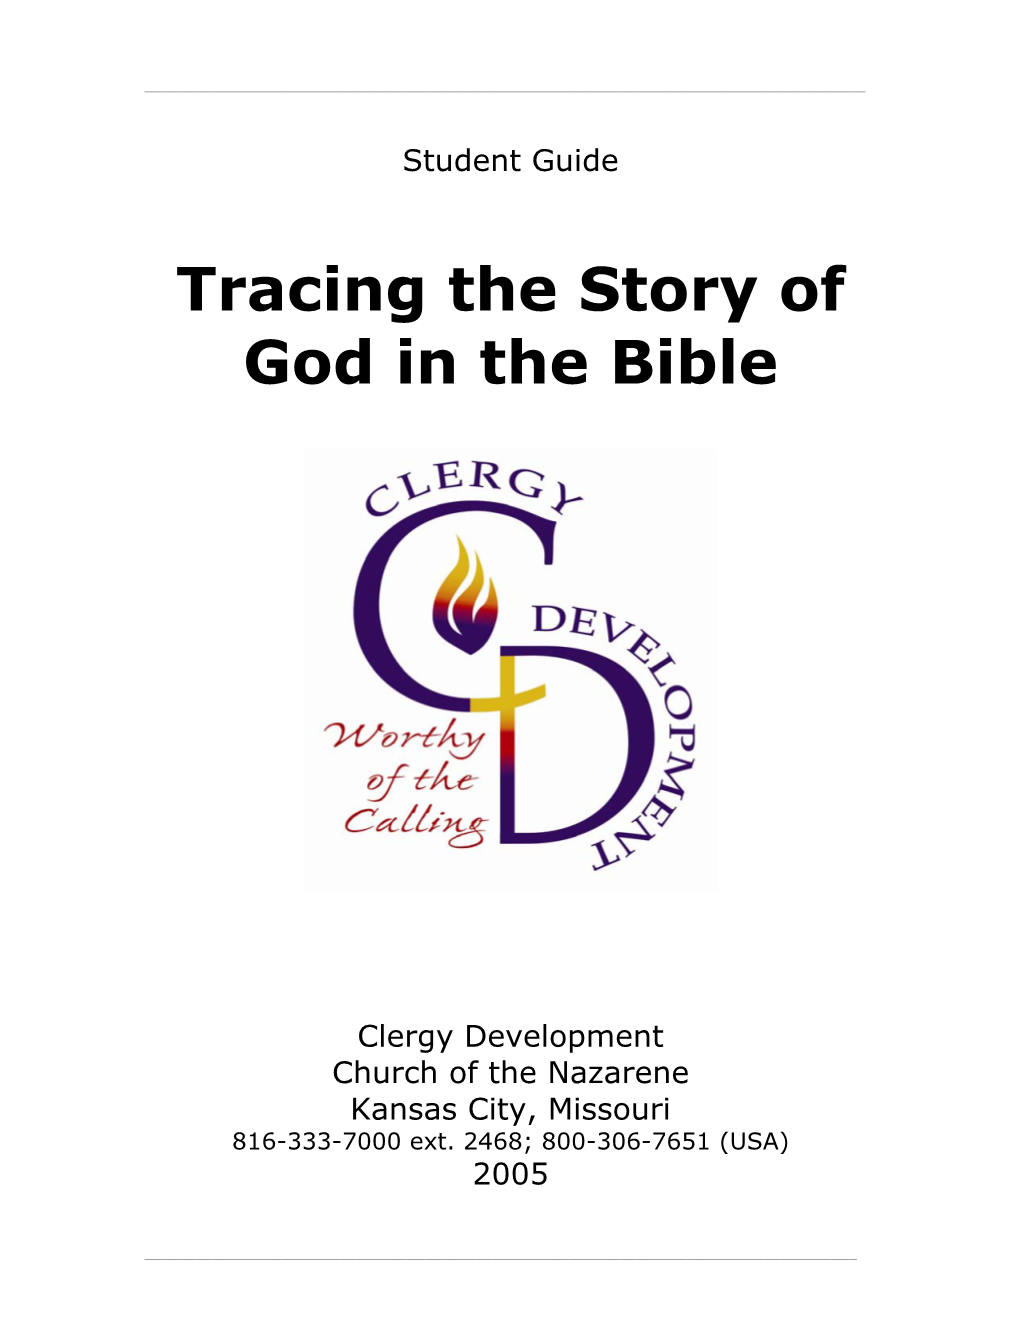 Tracing the Story of God in the Bible